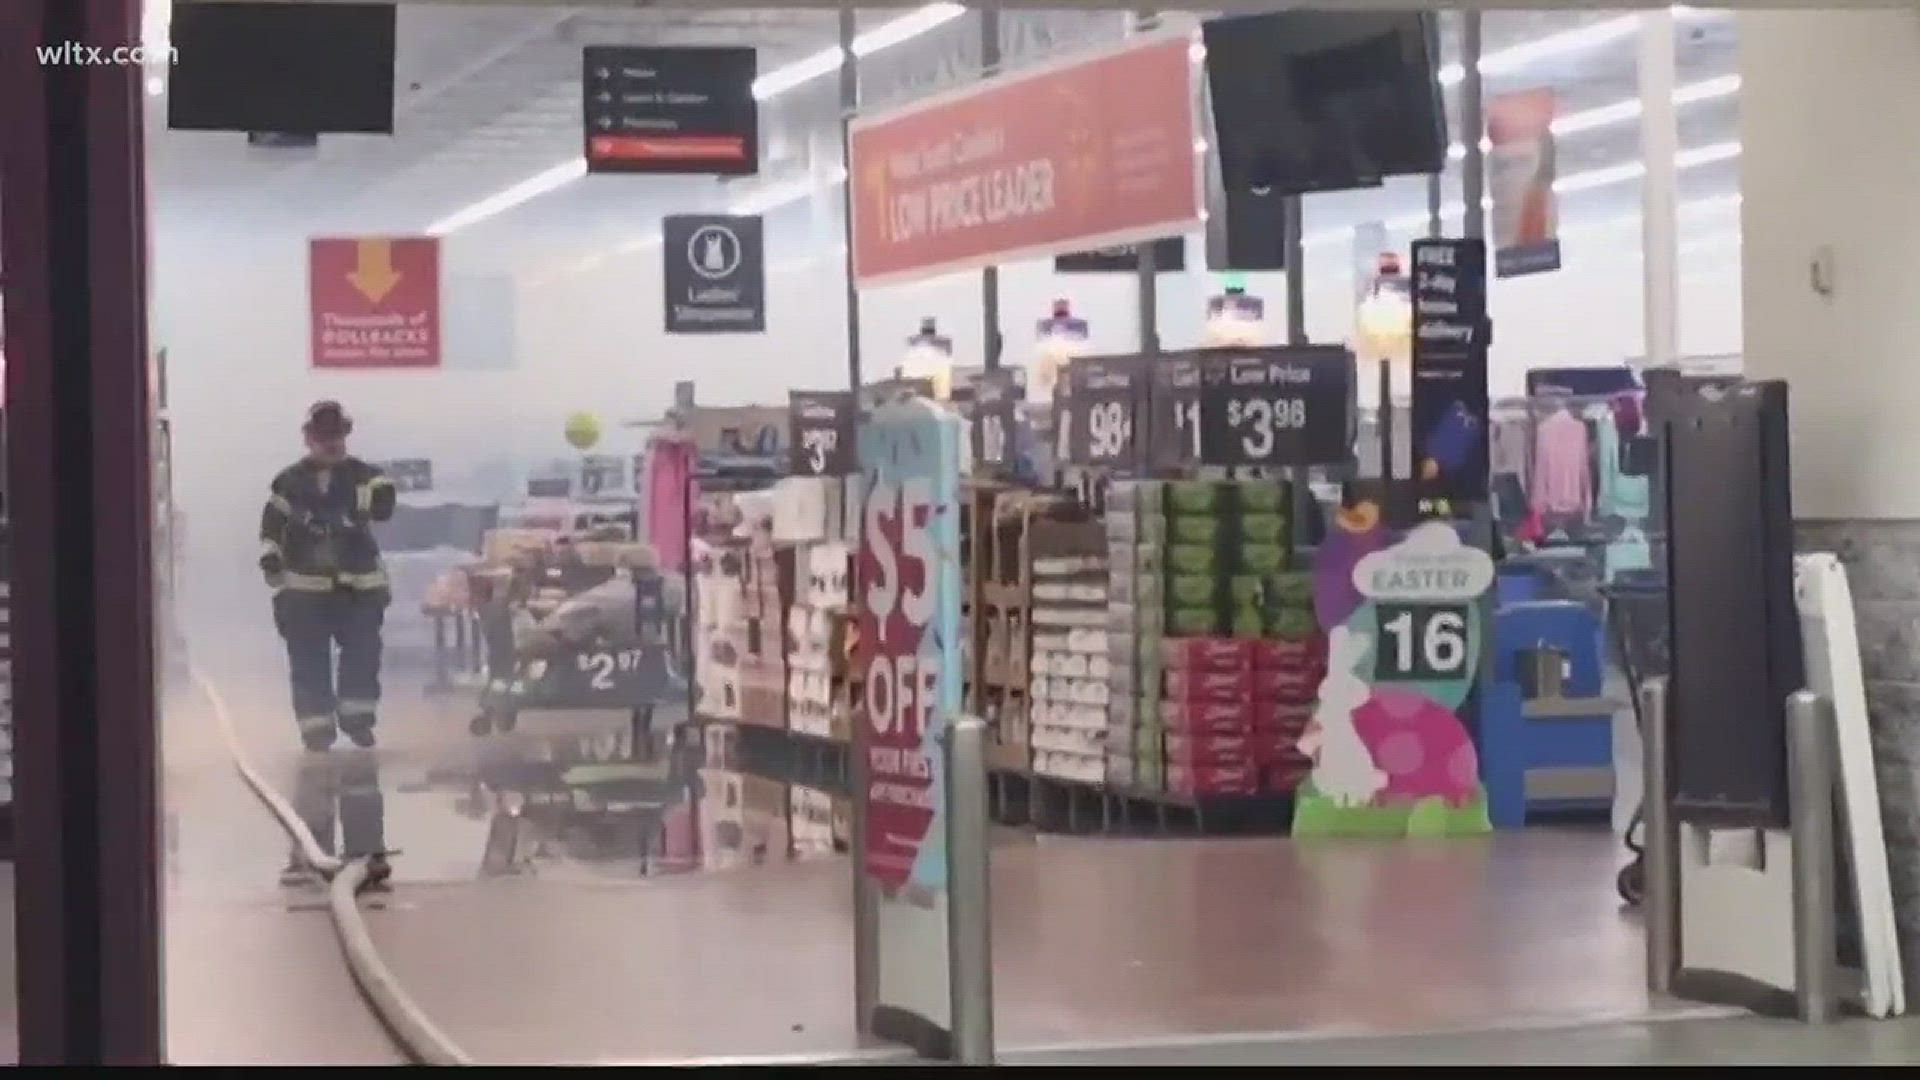 What started as a small fire has led to millions of dollars of damage for a Columbia walmart